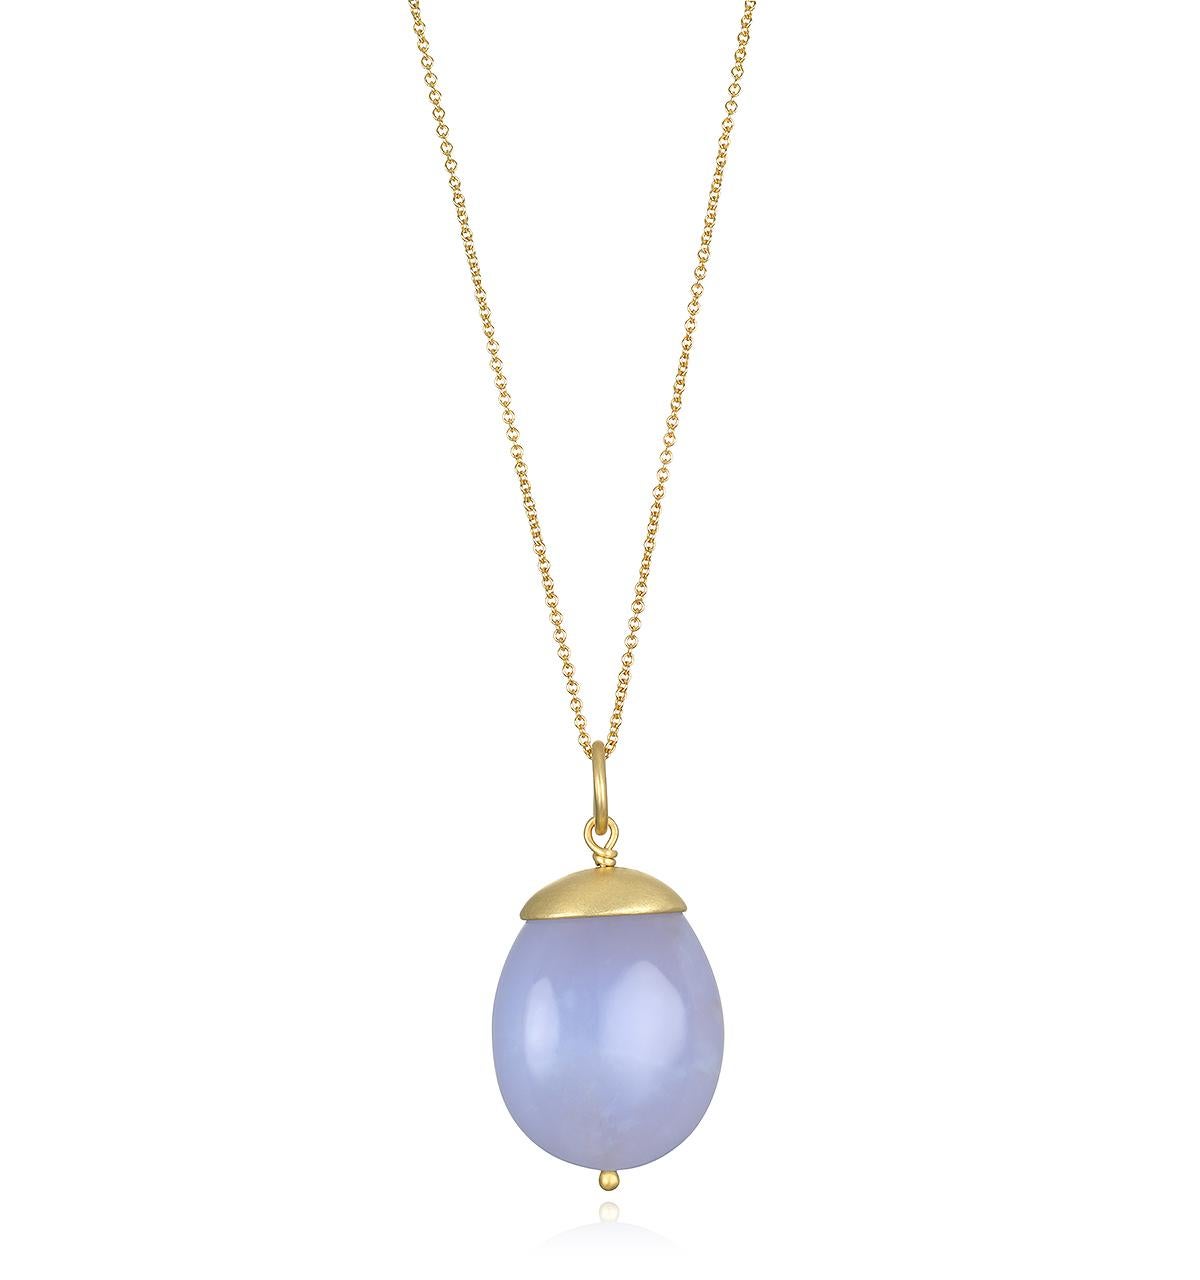 Faye Kim's 18 Karat Gold Chalcedony Nugget Pendant, with its translucent grayish-blue hue, is sure to make a design statement! This unique, one of a kind piece is finished with Faye's signature gold cap and bead.

Photos also show pendant on 18